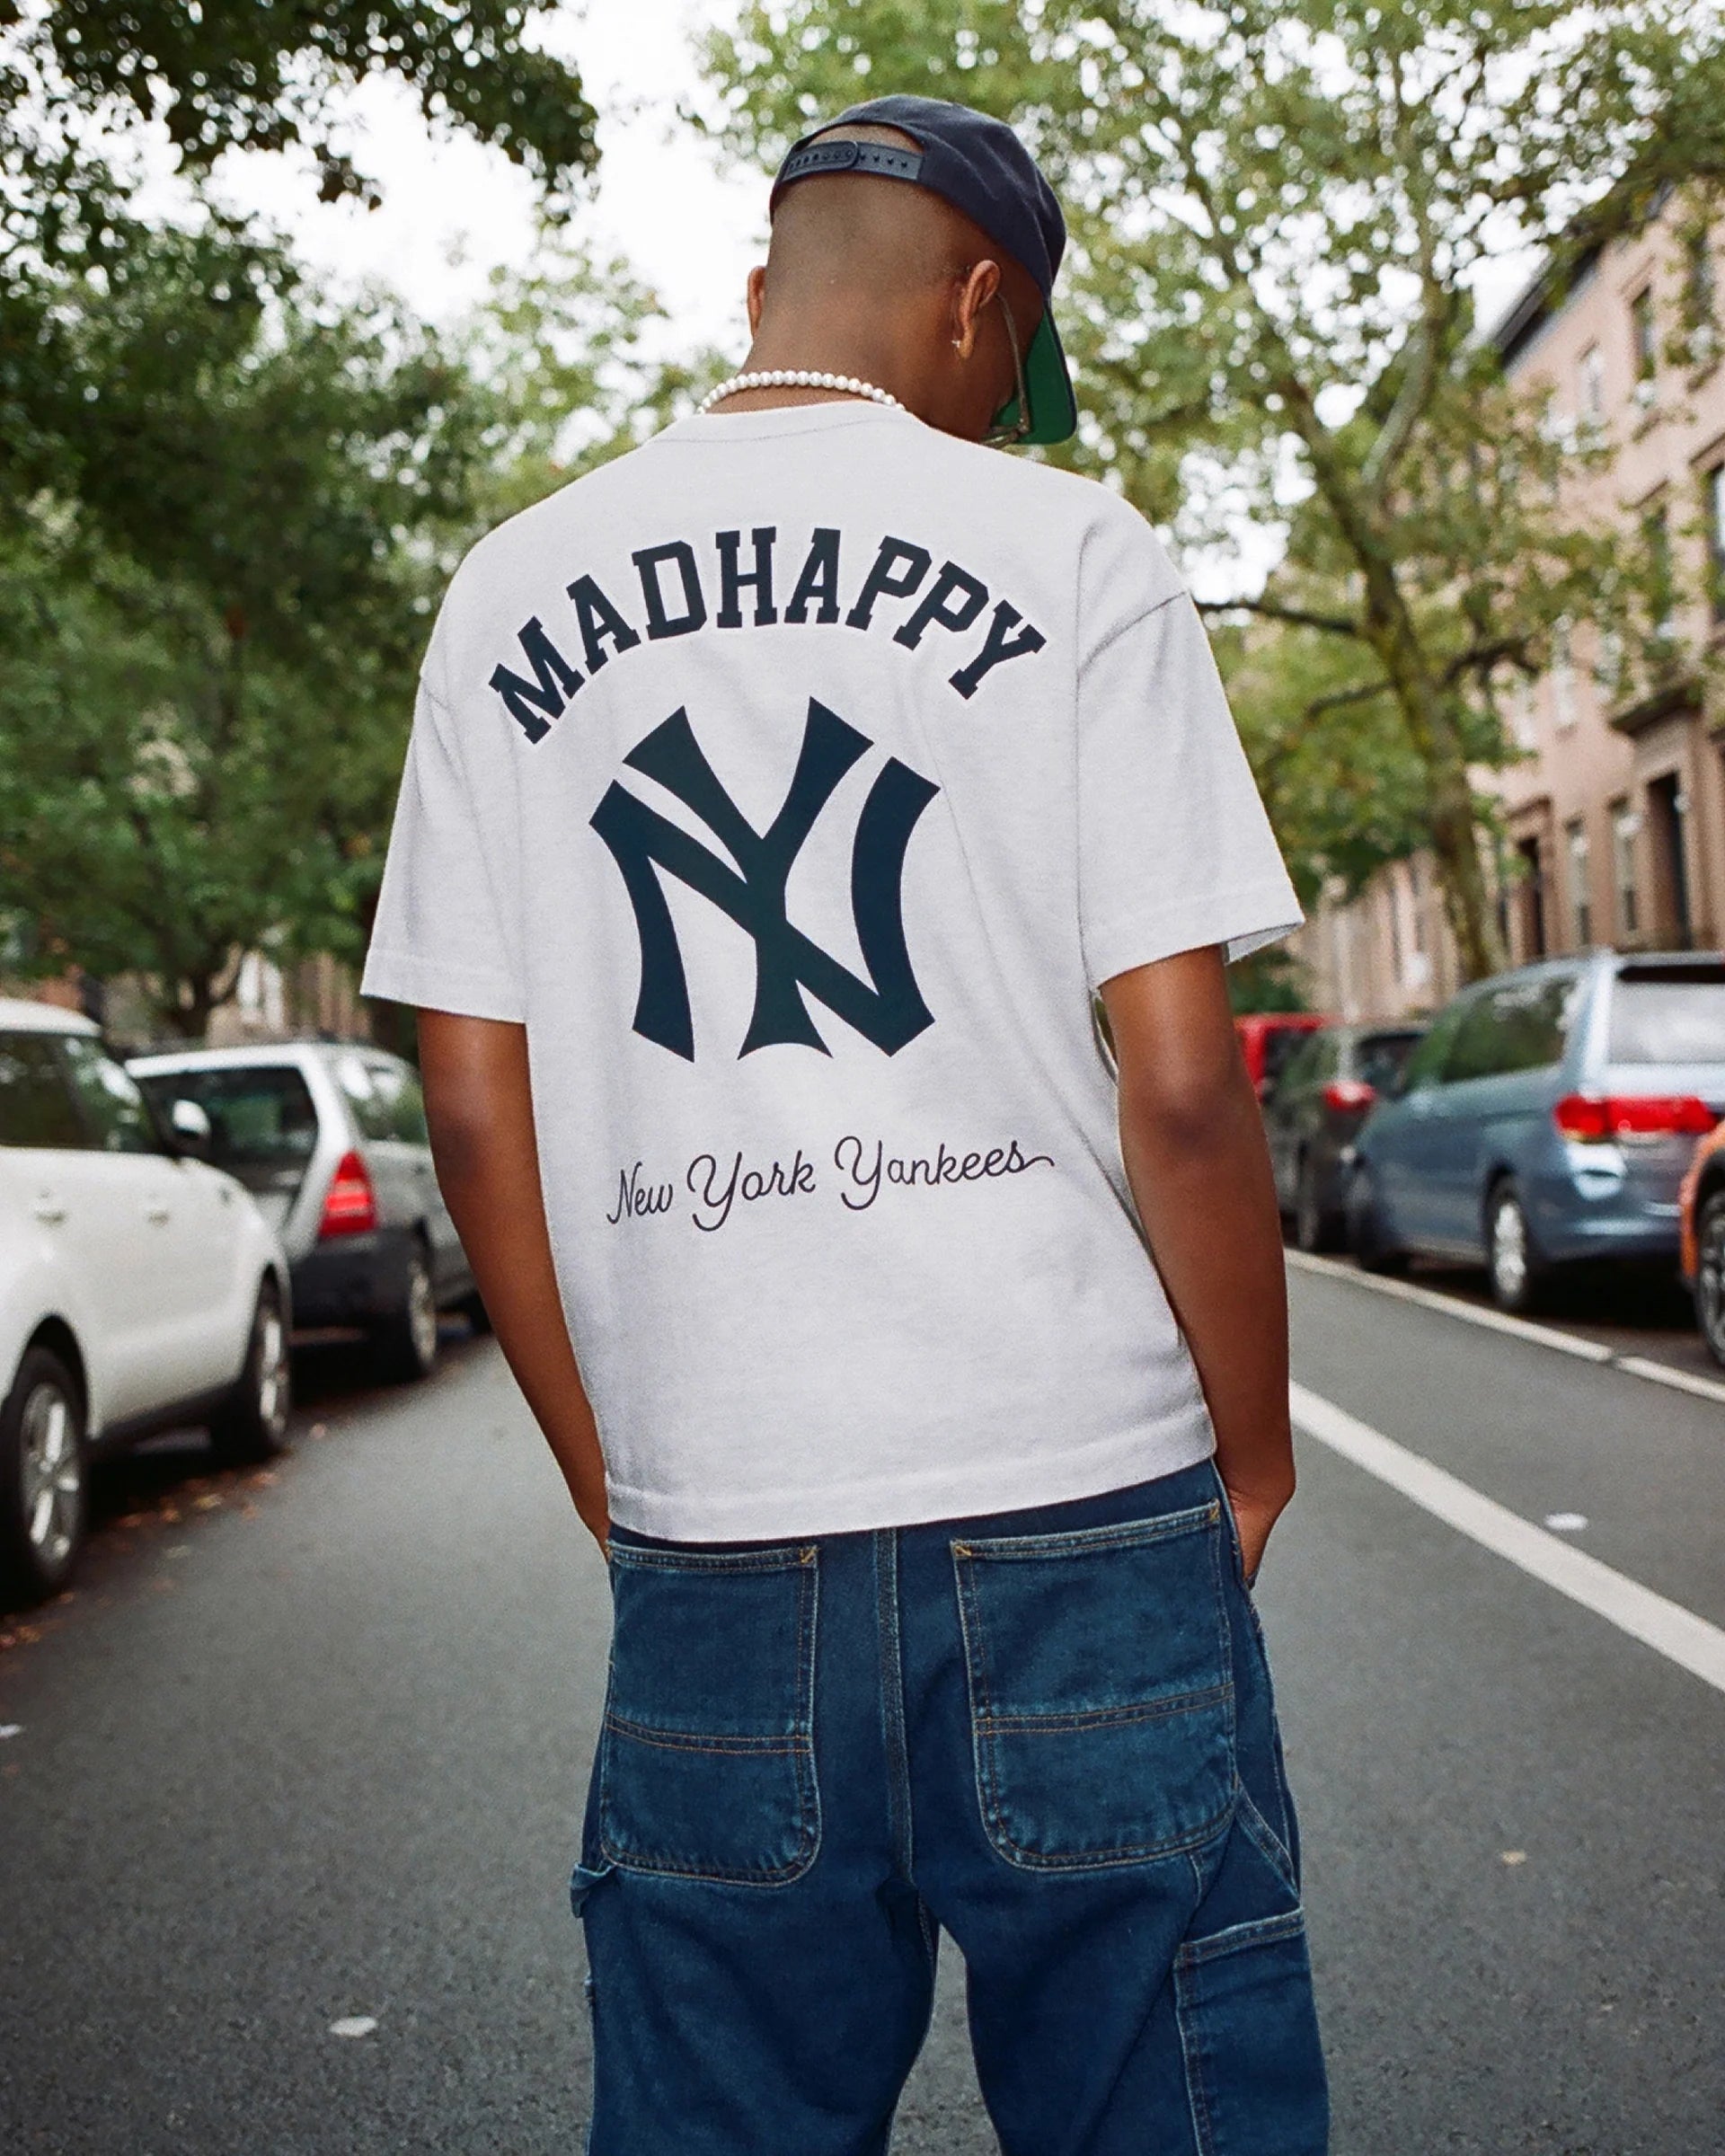 New York Yankees FW22 Campaign – Madhappy